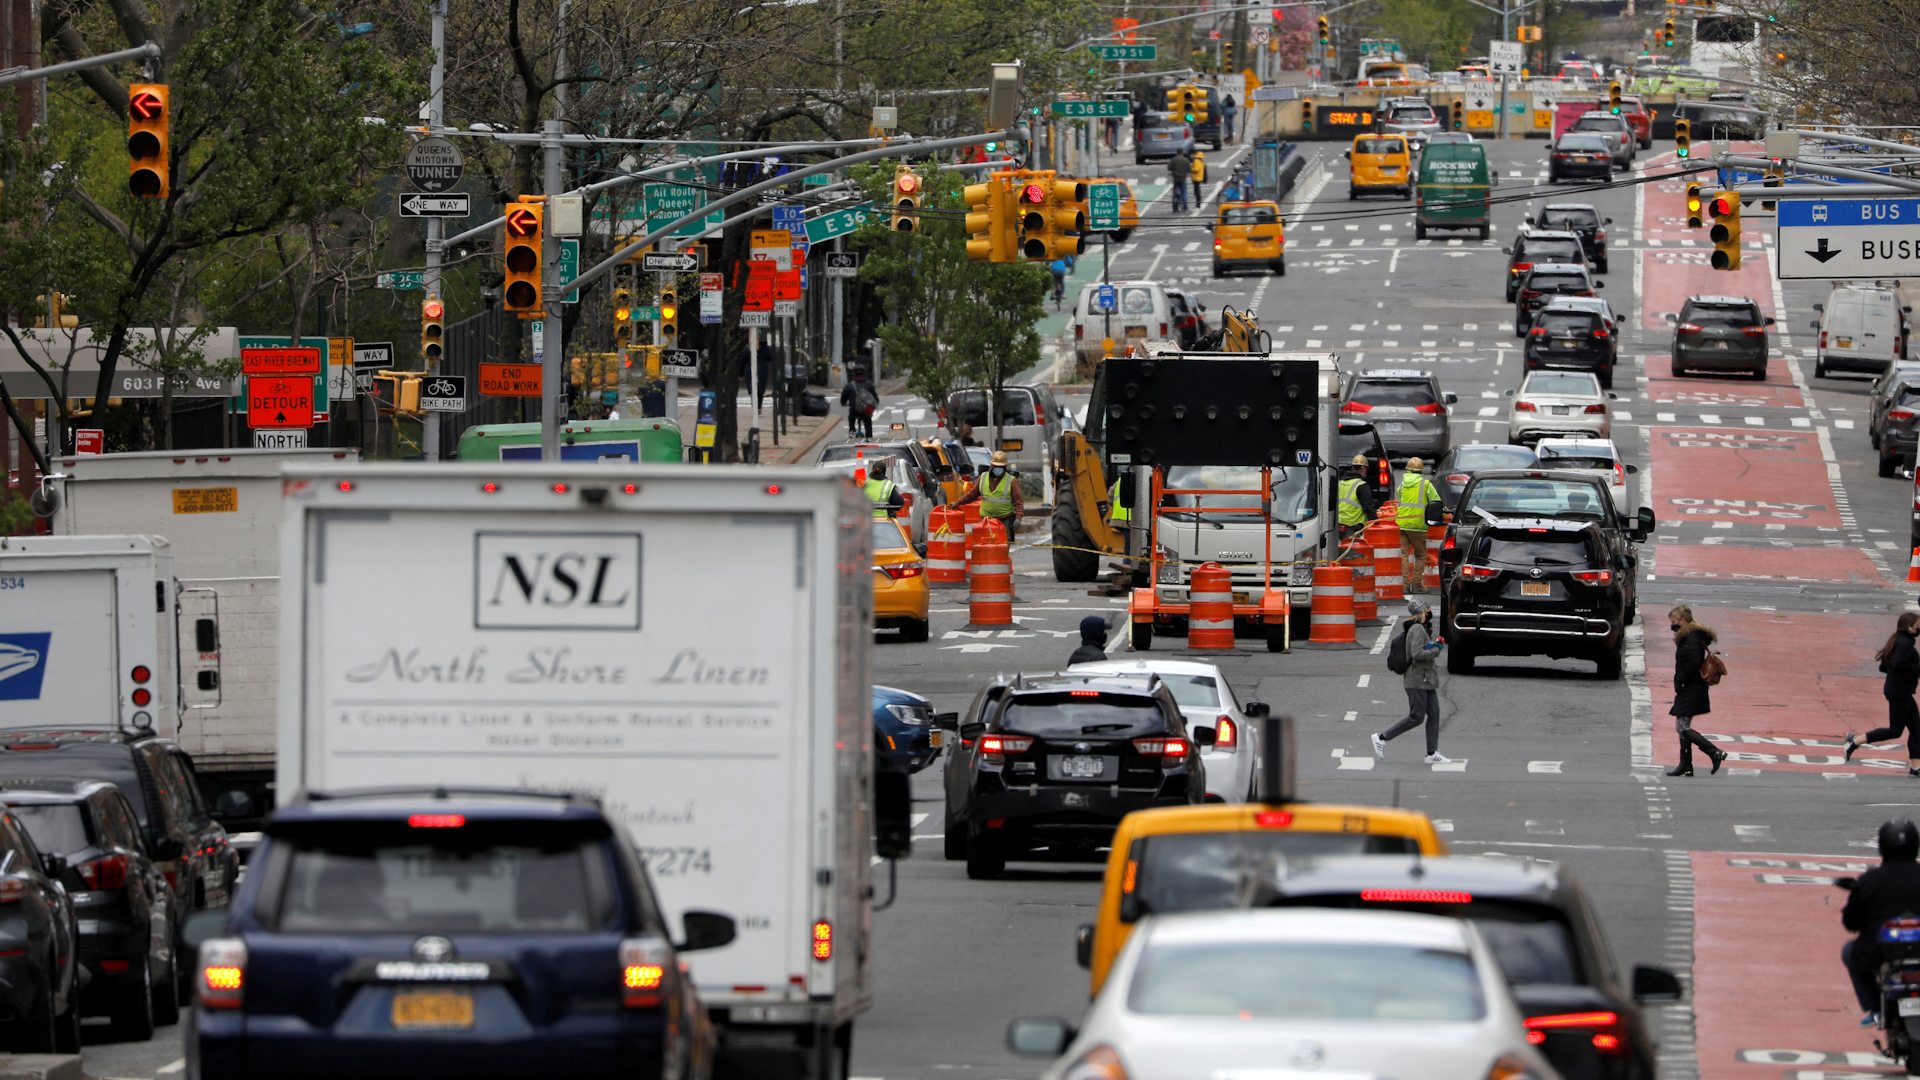 Drivers in New York City will soon face a  toll to enter the heart of Manhattan, marking the first such congestion pricing toll in the United States aimed at reducing traffic and pollution. The Metropolitan Transportation Authority board approved the congestion pricing plan, set to start in June. The plan, largely unchanged from earlier proposals, will not include exemptions for various commuter groups despite their requests.